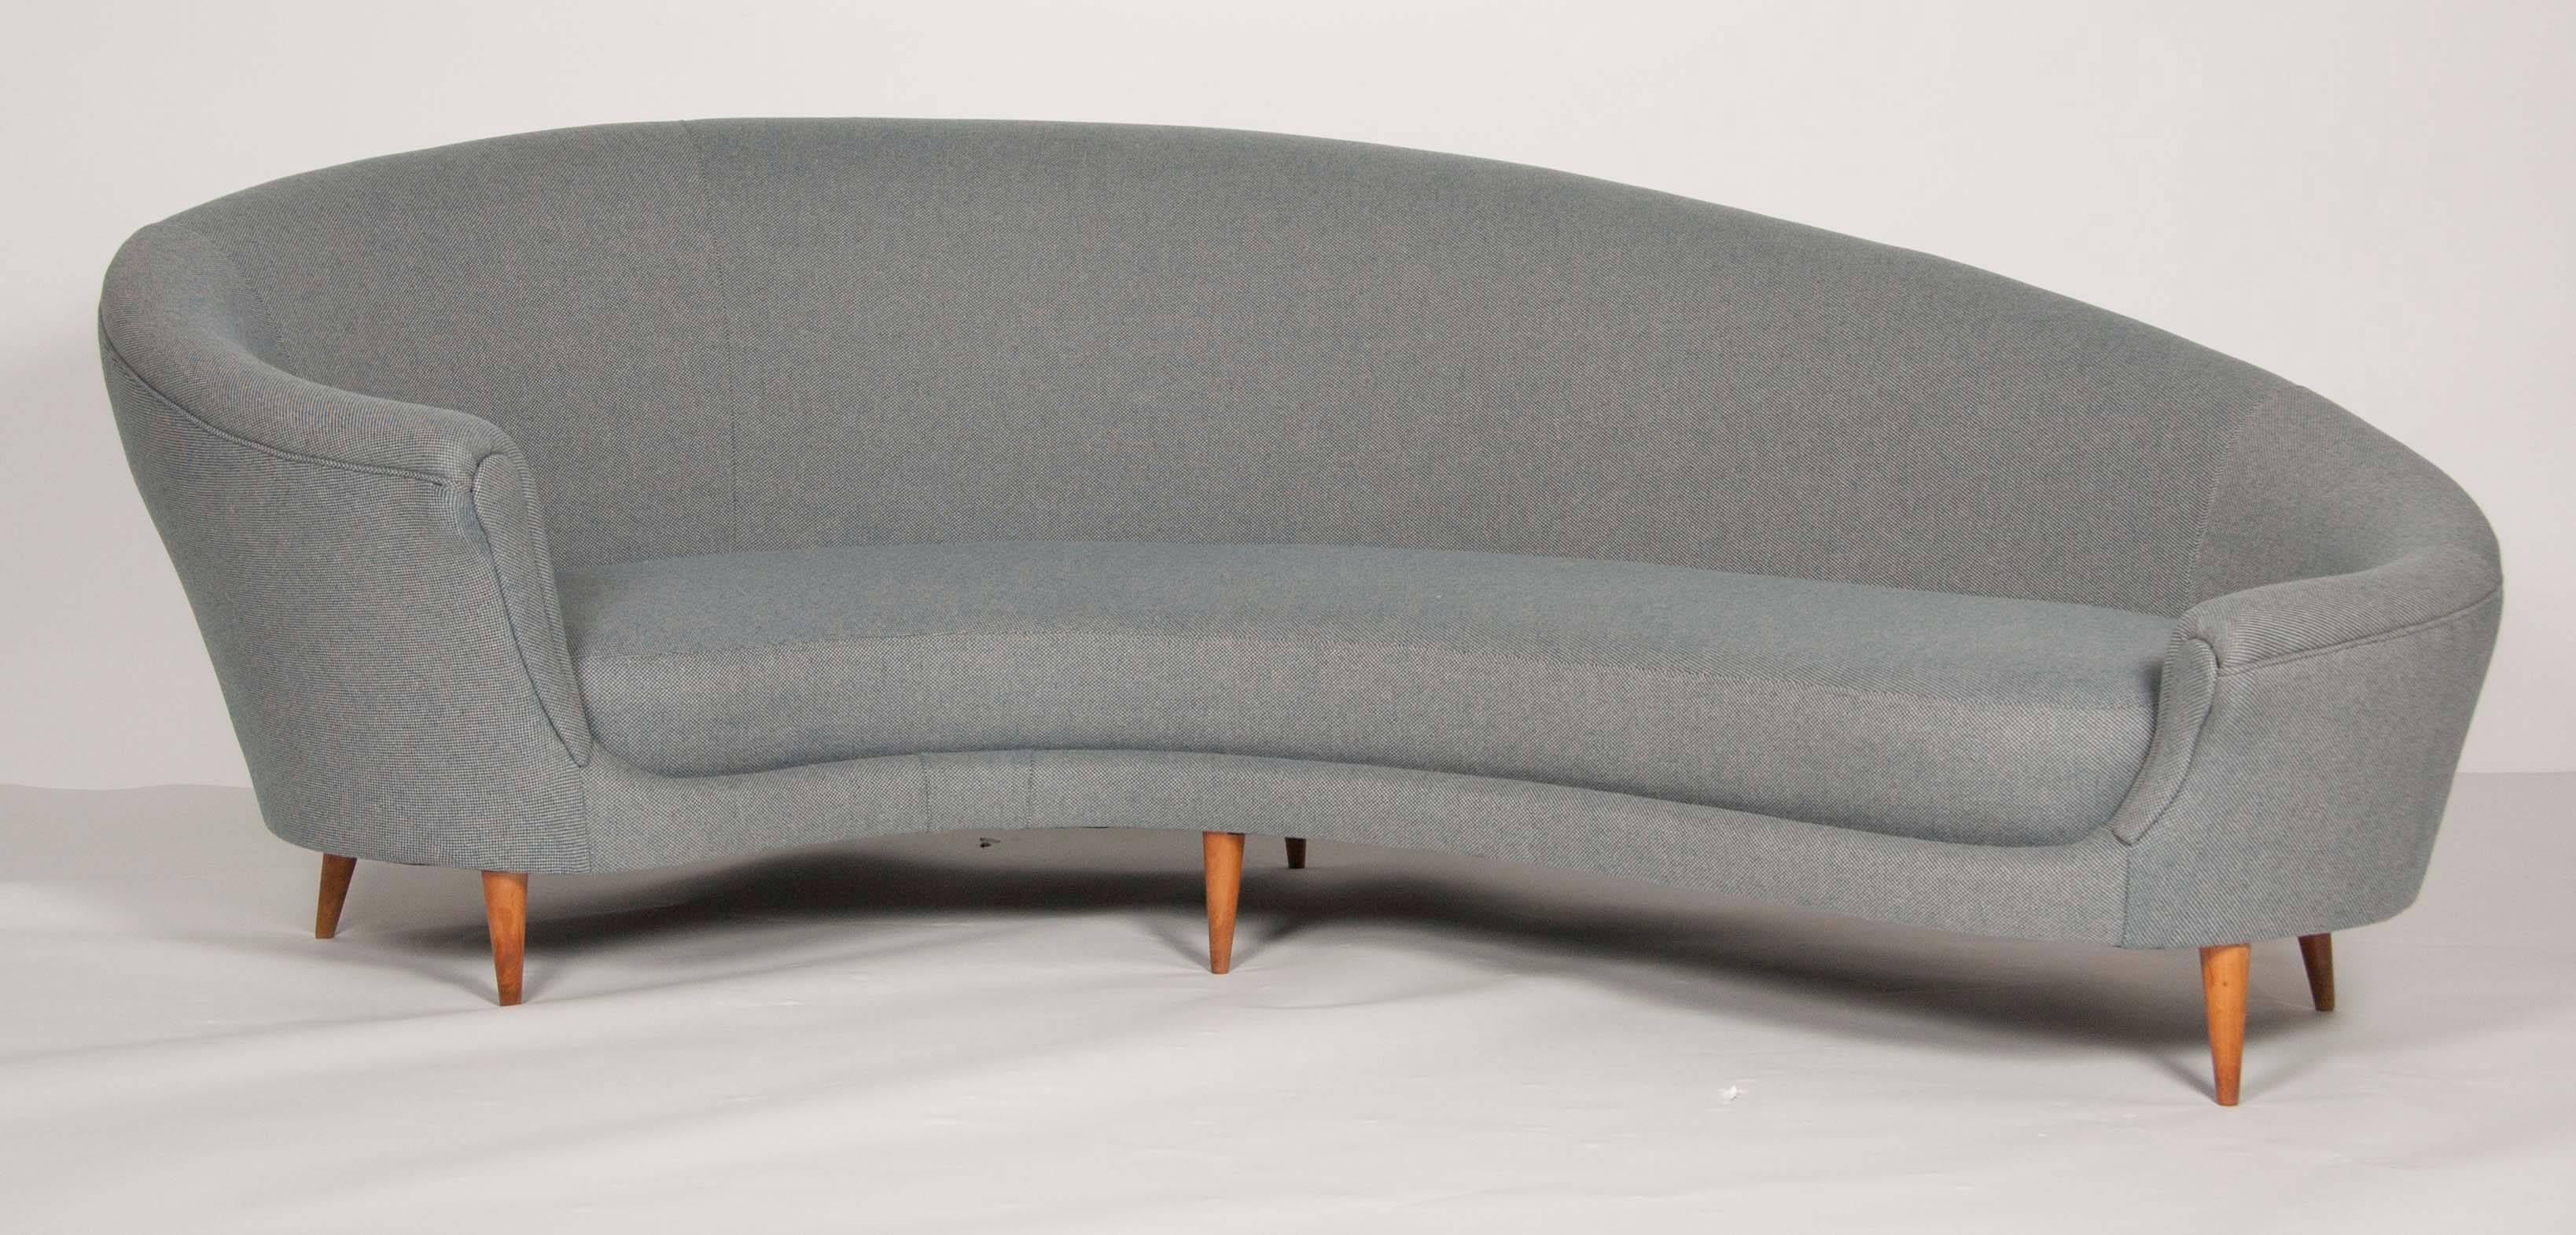 An Italian free form sofa in the manner of Federico Munari. Very finely upholstered in felted wool by Rogers and Goffigon.